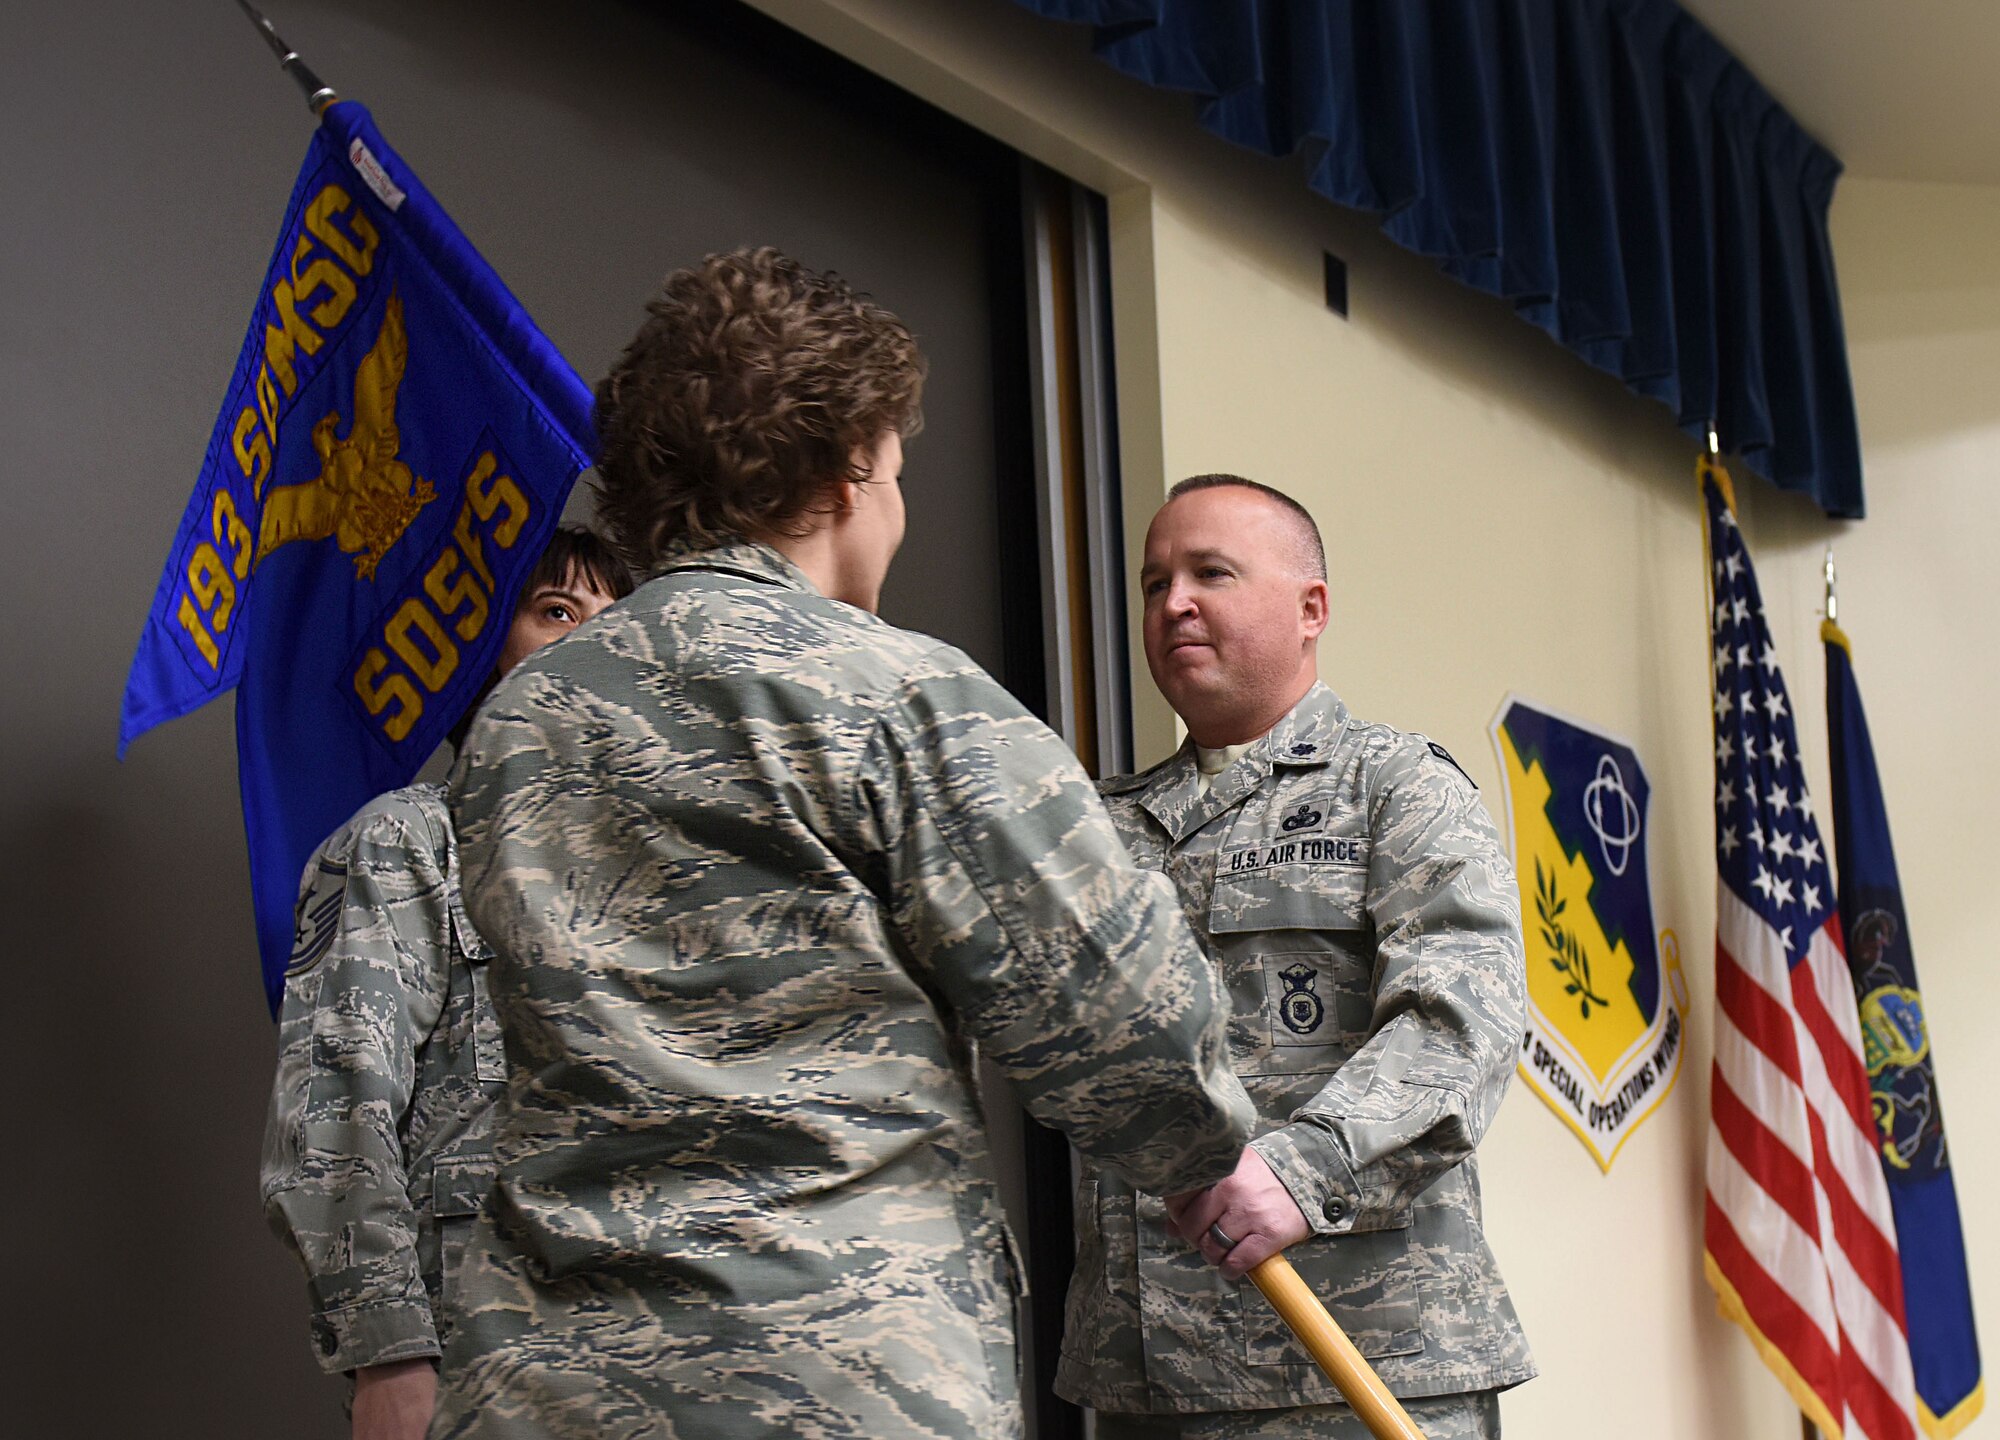 U.S. Air Force Lt. Col. Barry Strube, 193rd Special Operations Security Forces Squadron commander, Pennsylvania Air National Guard, accepts the guidon from Col. Susan Garrett, 193rd Special Operations Mission Support Group commander, during an assumption of command ceremony April 8, 2018, in Middletown, Pennsylvania. The ceremony began with preliminary honors and ended with the symbolic passing of the guidon. (U.S. Air National Guard photo by Senior Airman Julia Sorber/Released)